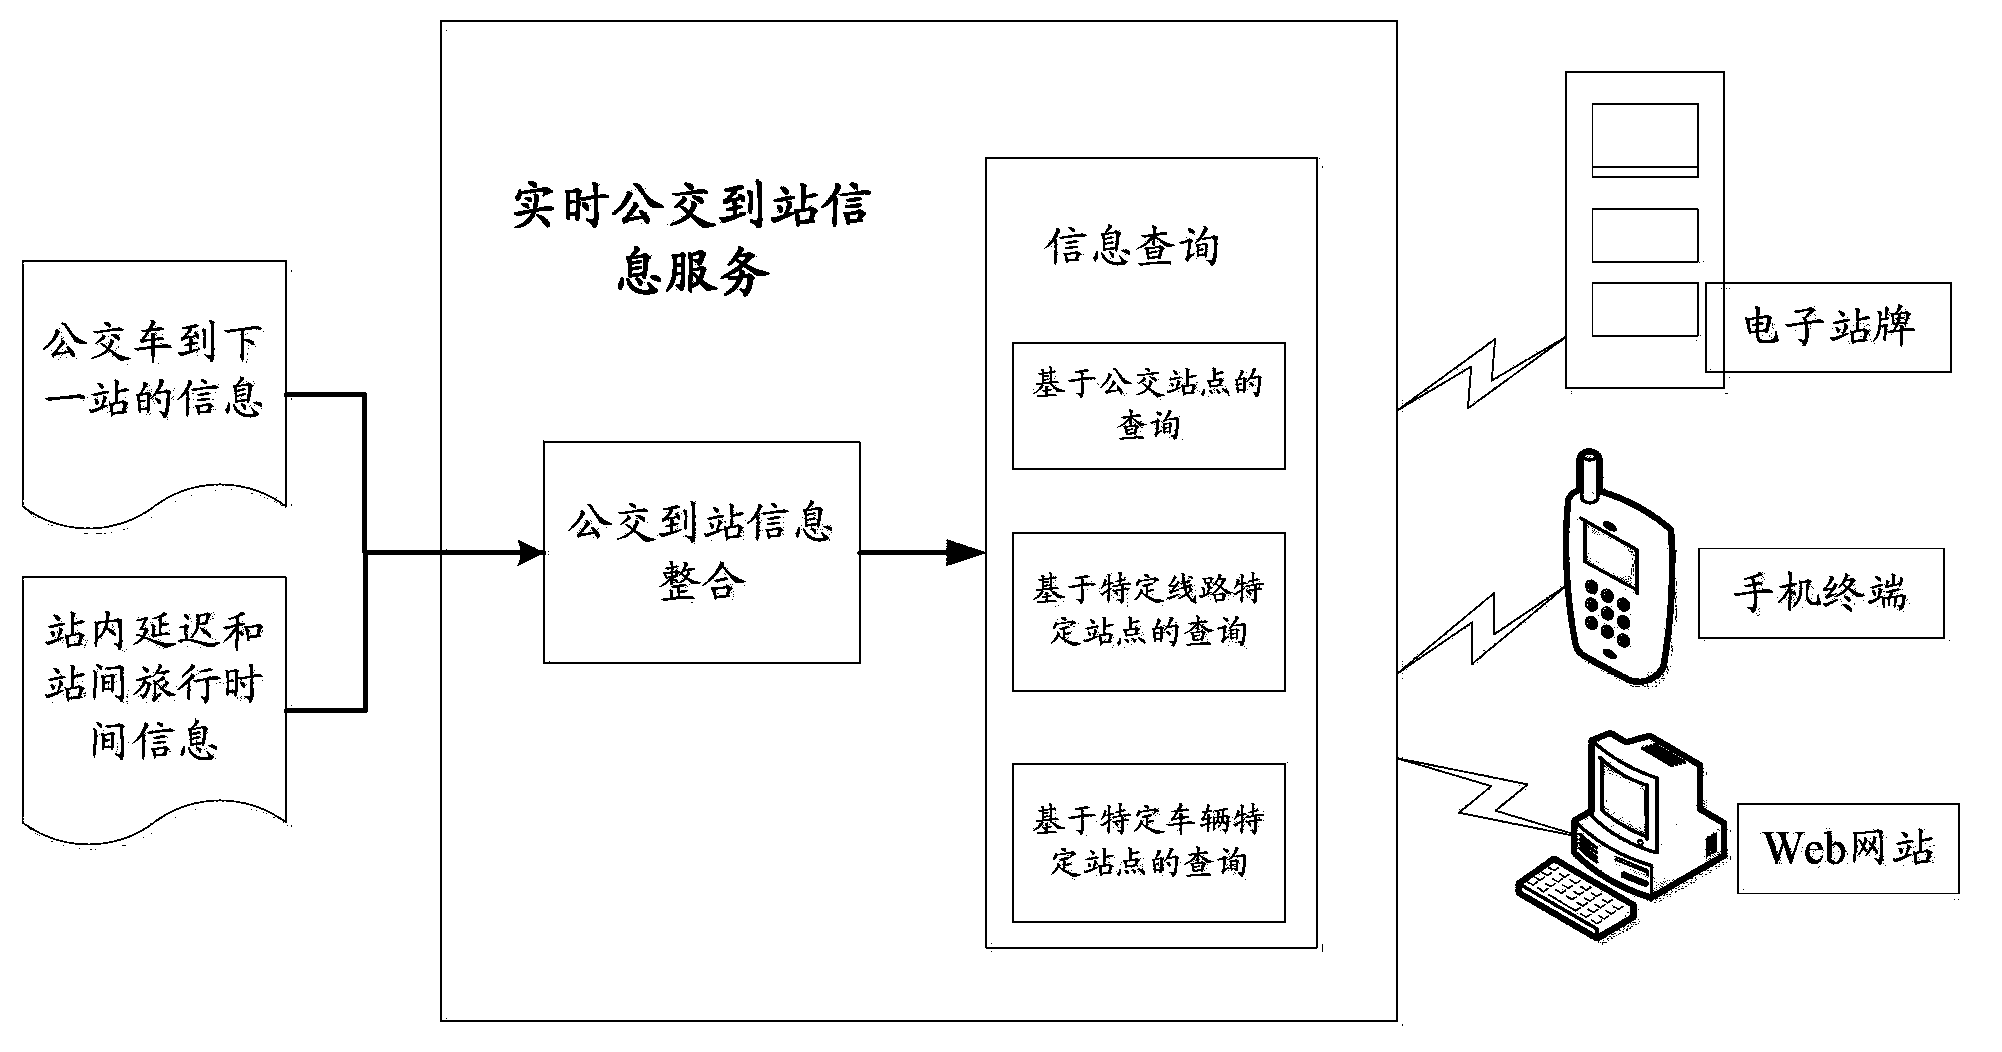 Method of querying real-time bus arrival information